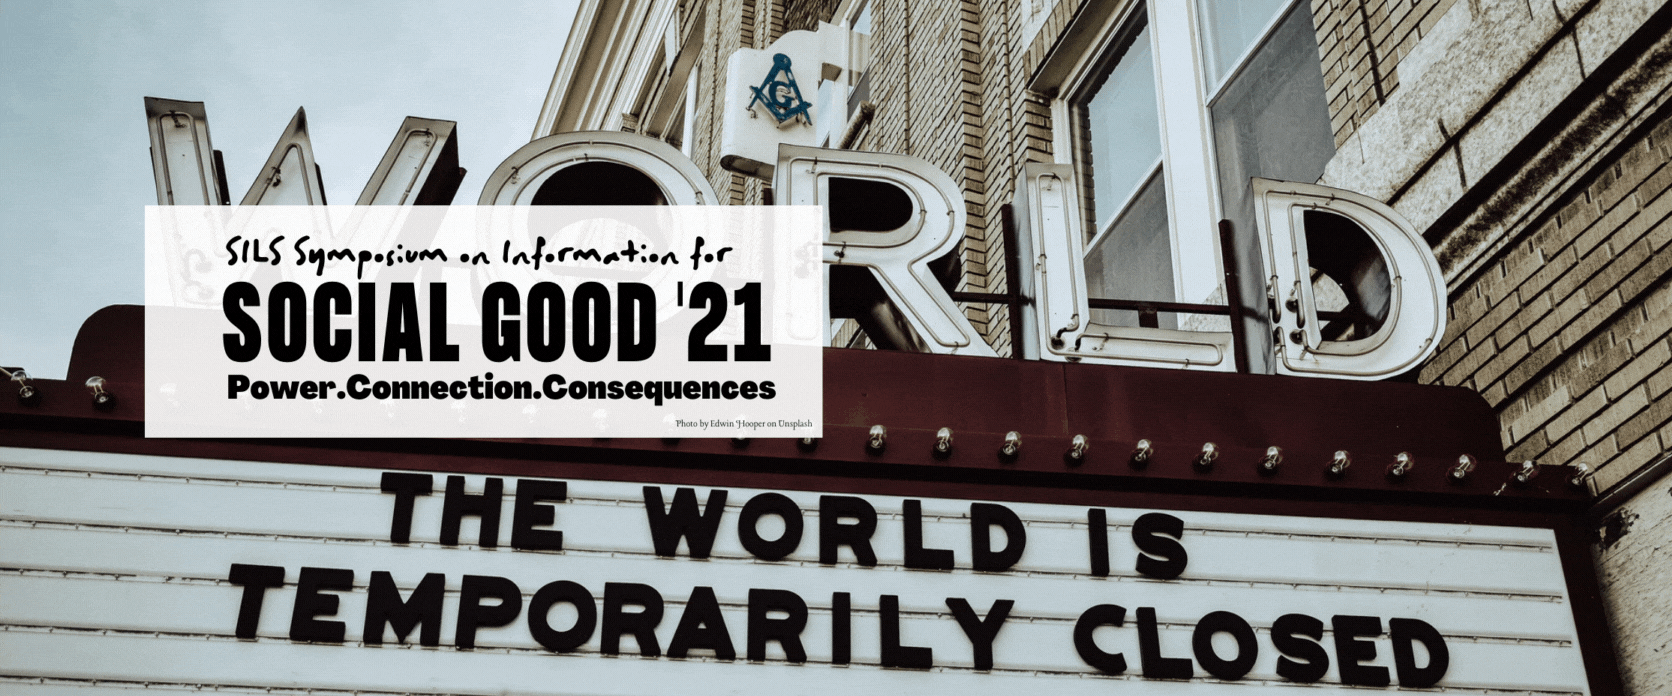 Symposium on Information and Social Good 2021: Power. Connection. Consequences.